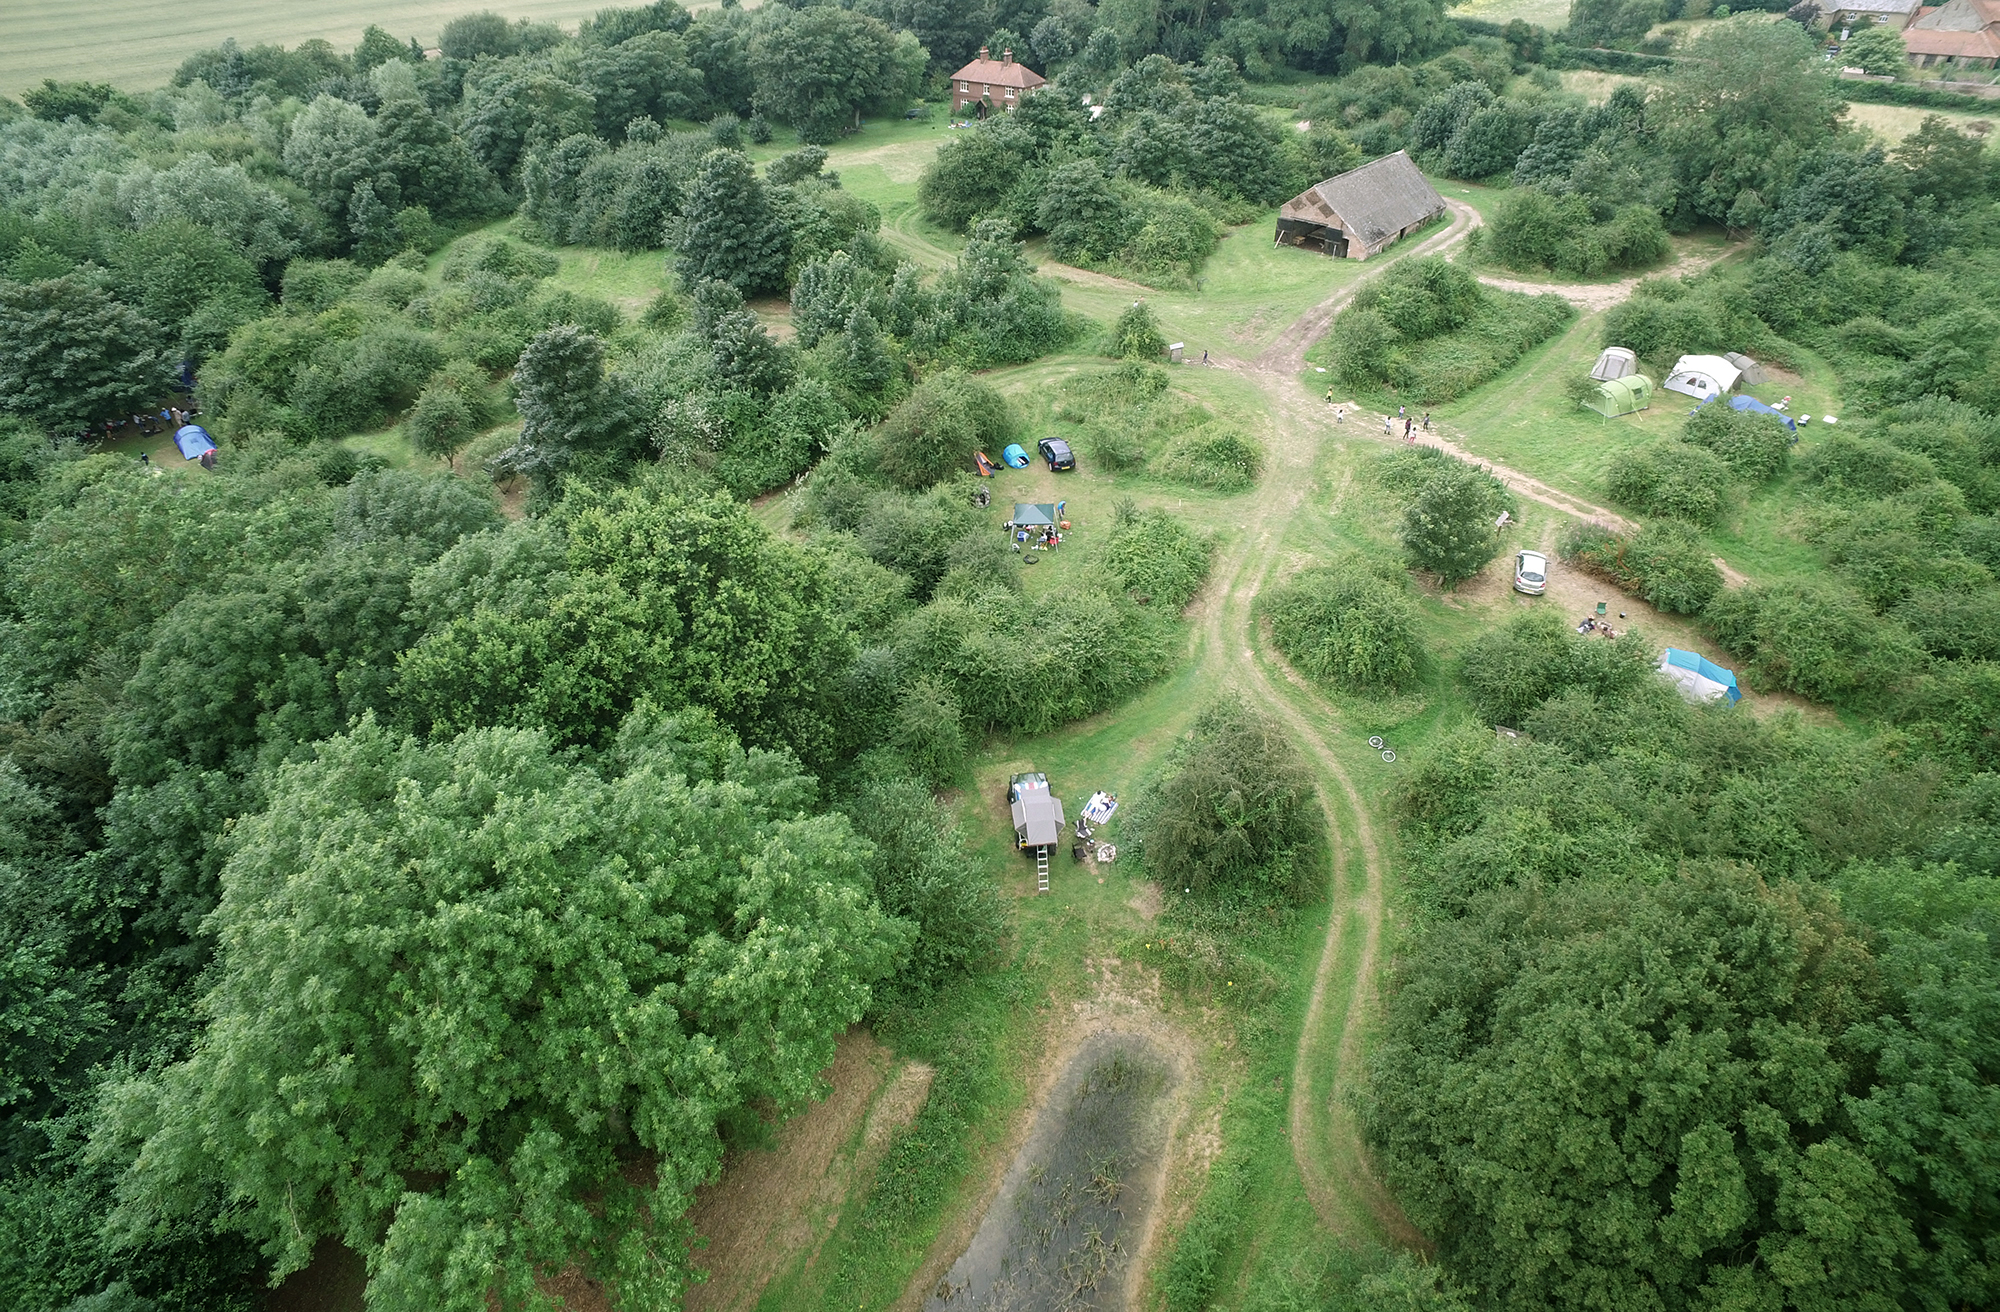 Our campsite from the air